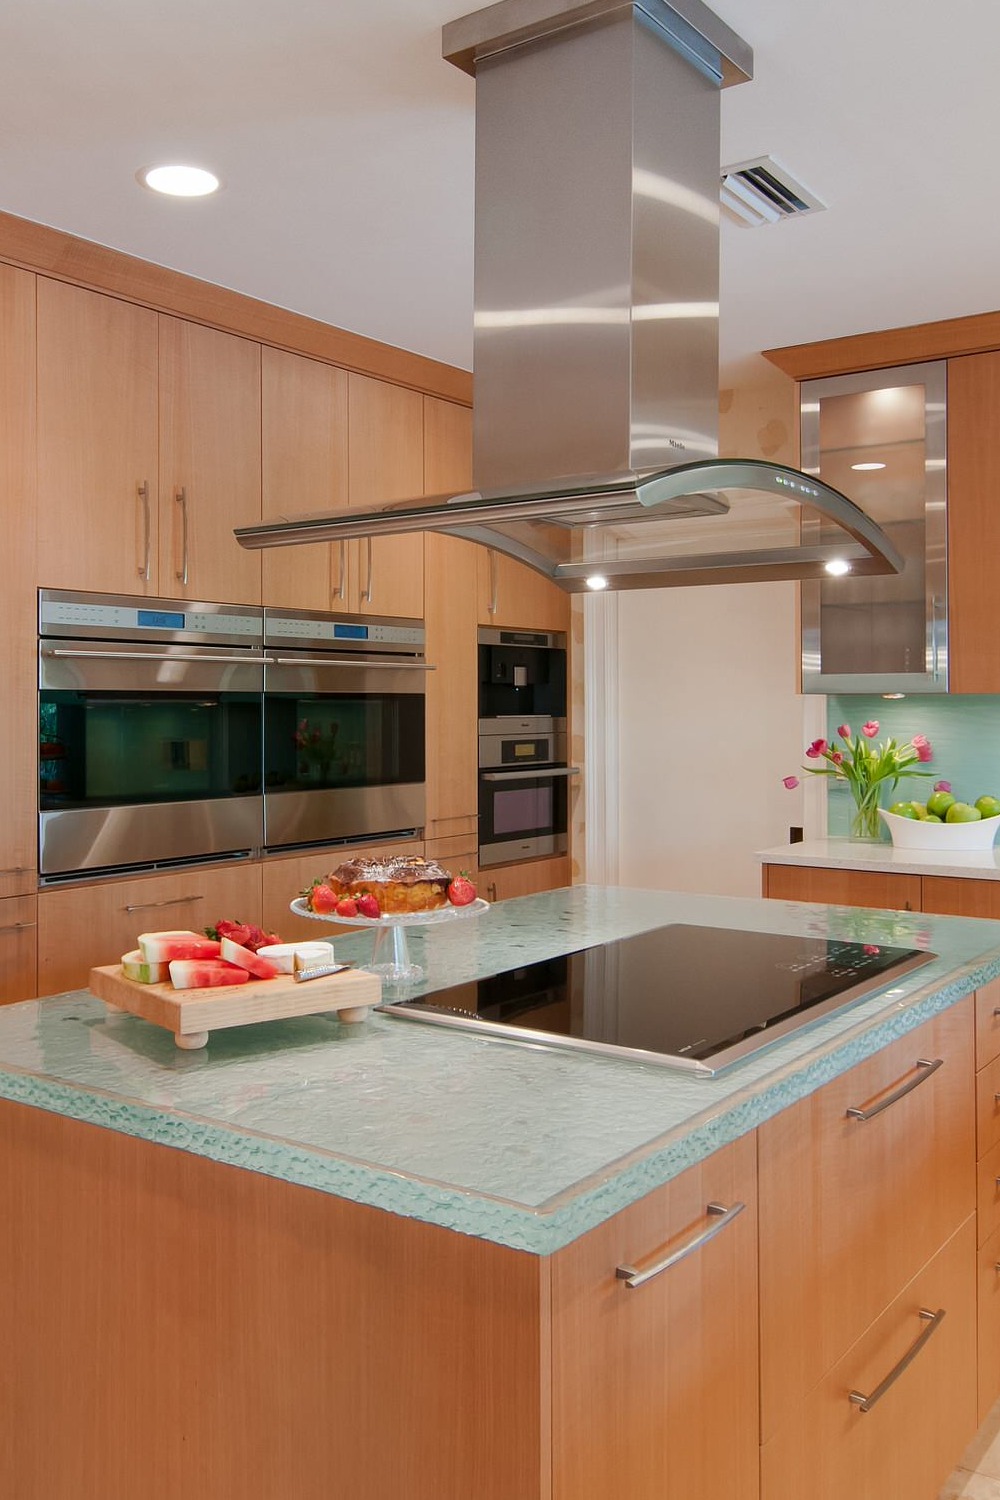 Recycled Glass Countertops Stainless Steel Appliances Flat Panel Cabinets Kitchen Island Textured Glass Materials Green Room